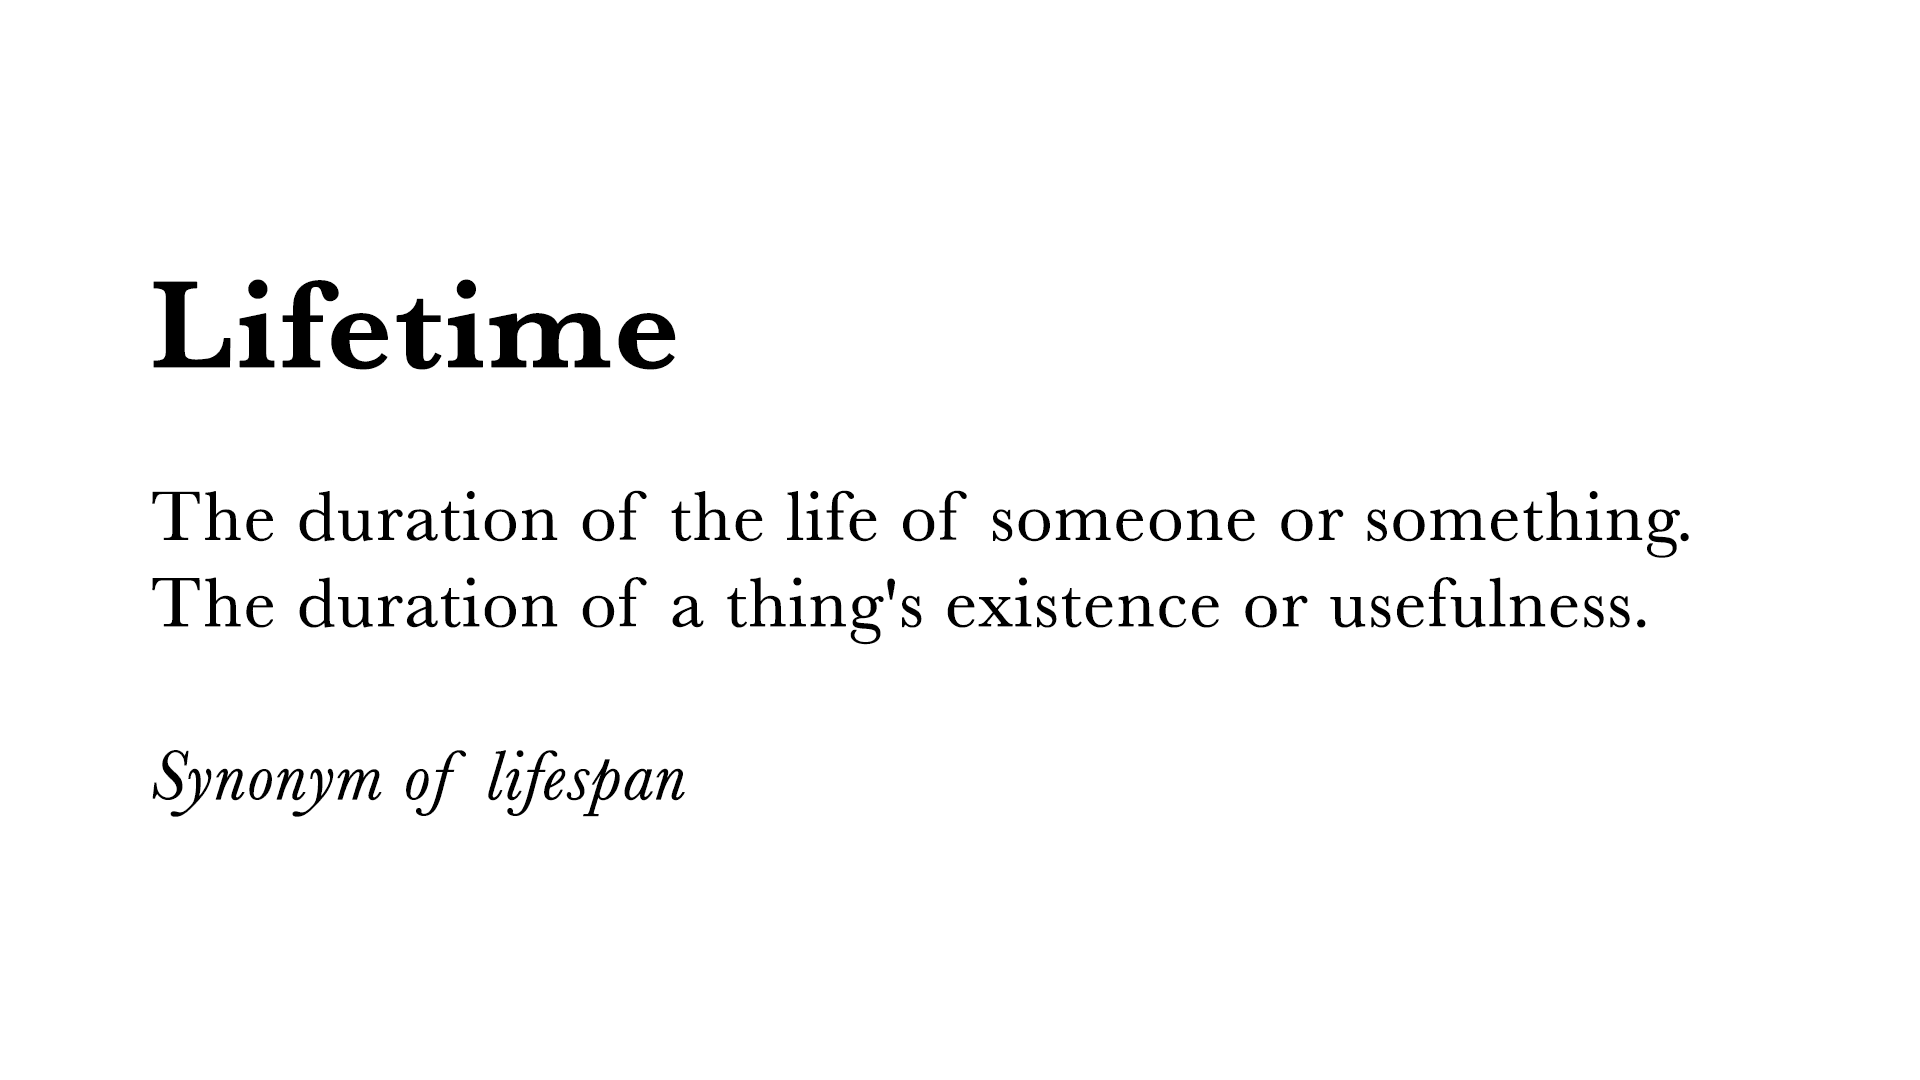 There is no such thing as a "lifetime"